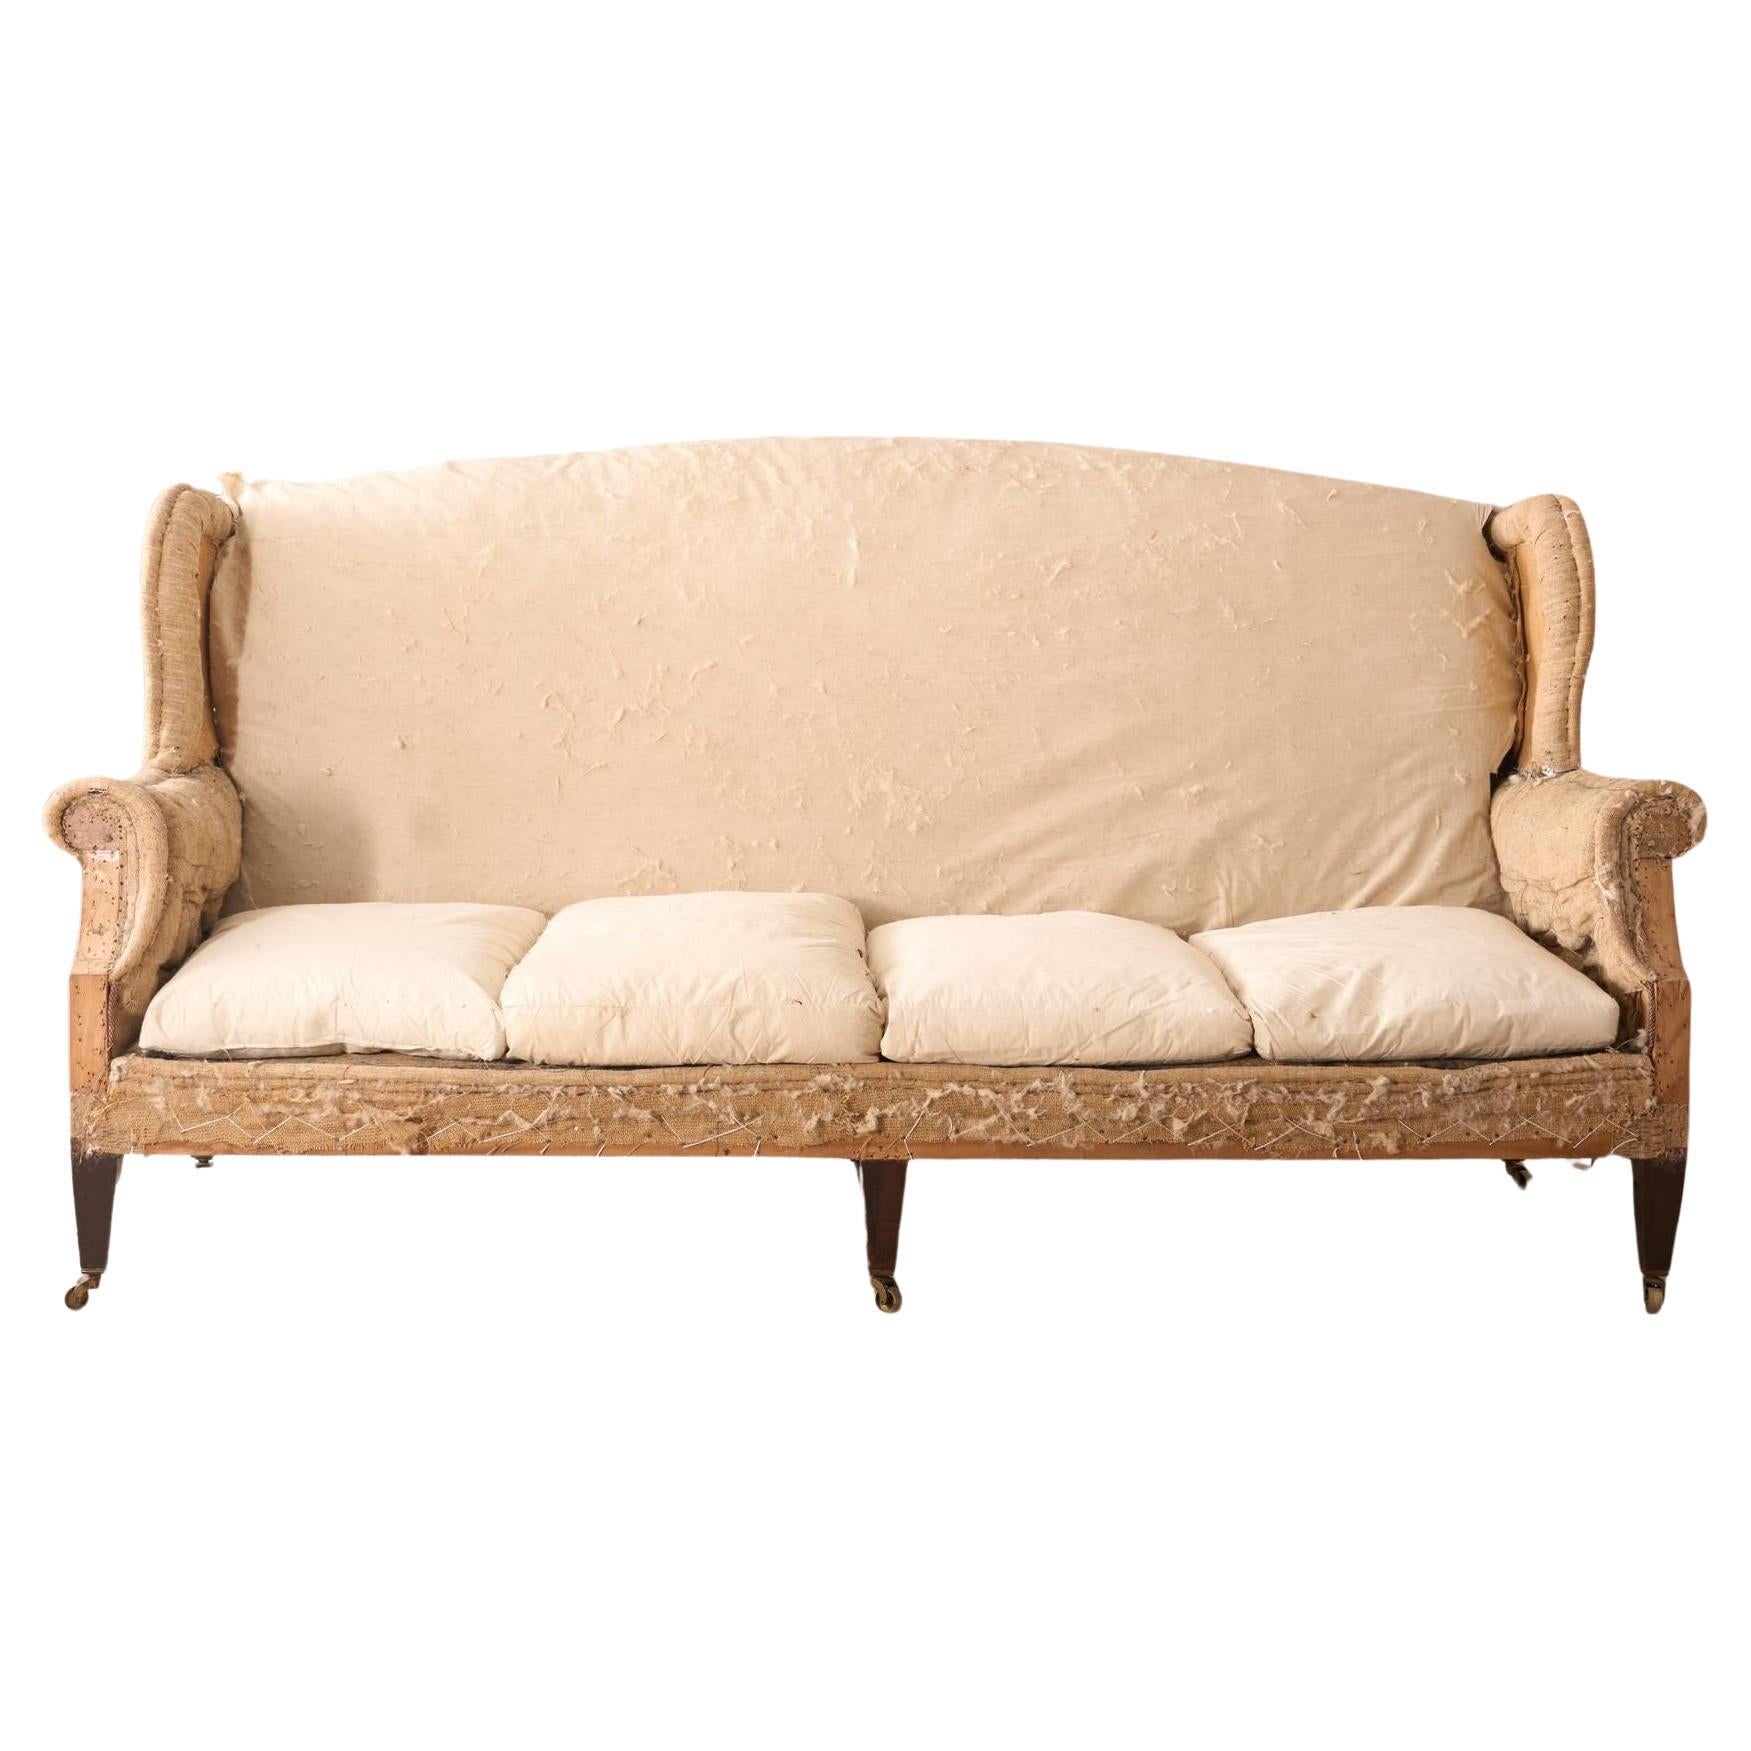 Victorian Wingback English country house sofa For Sale